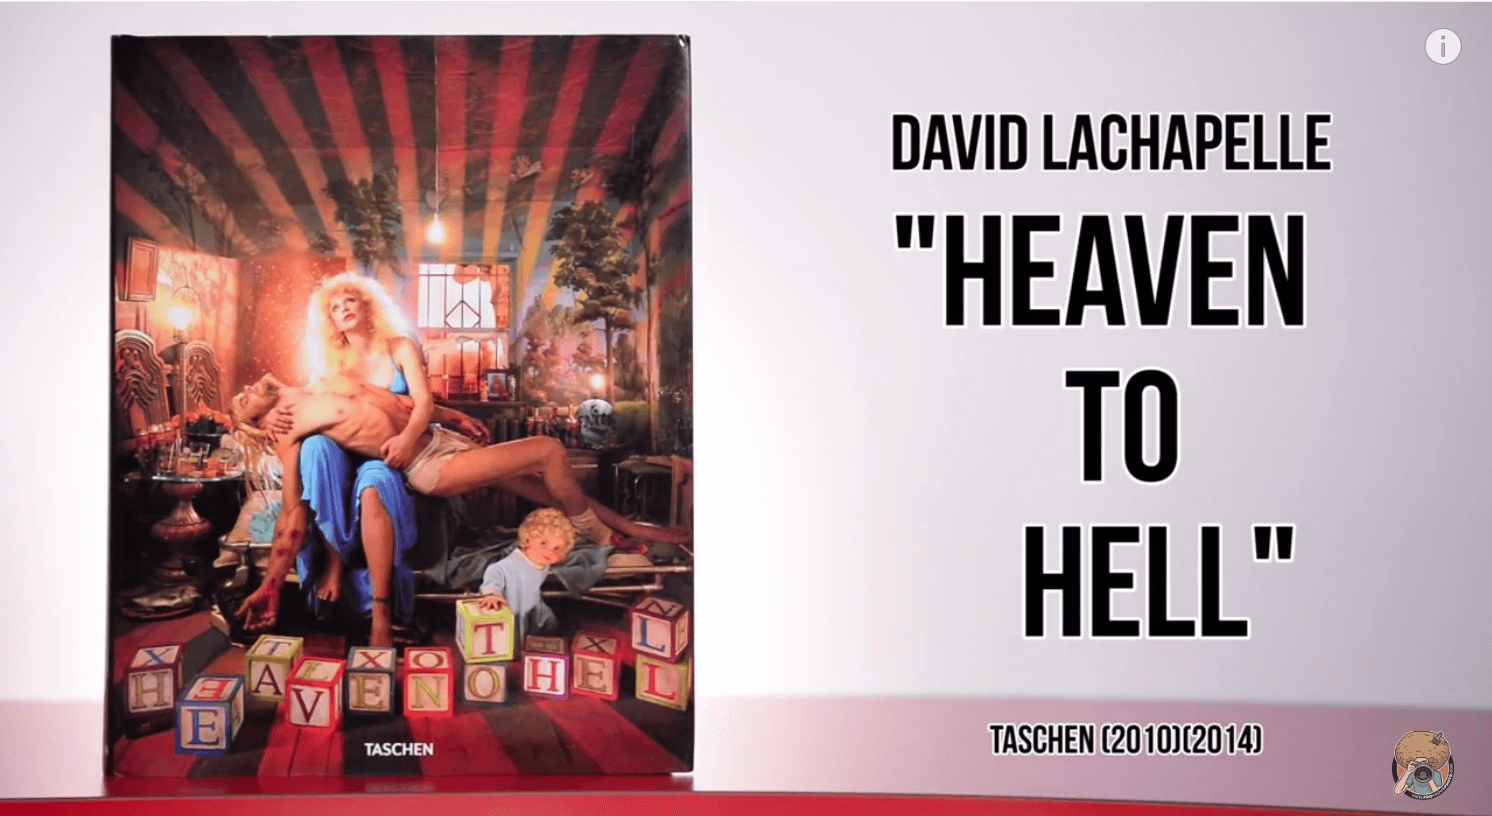 One Of The Most Perverse Books On My Shelf David Lachapelle Heaven To Hell Fro Knows Photo